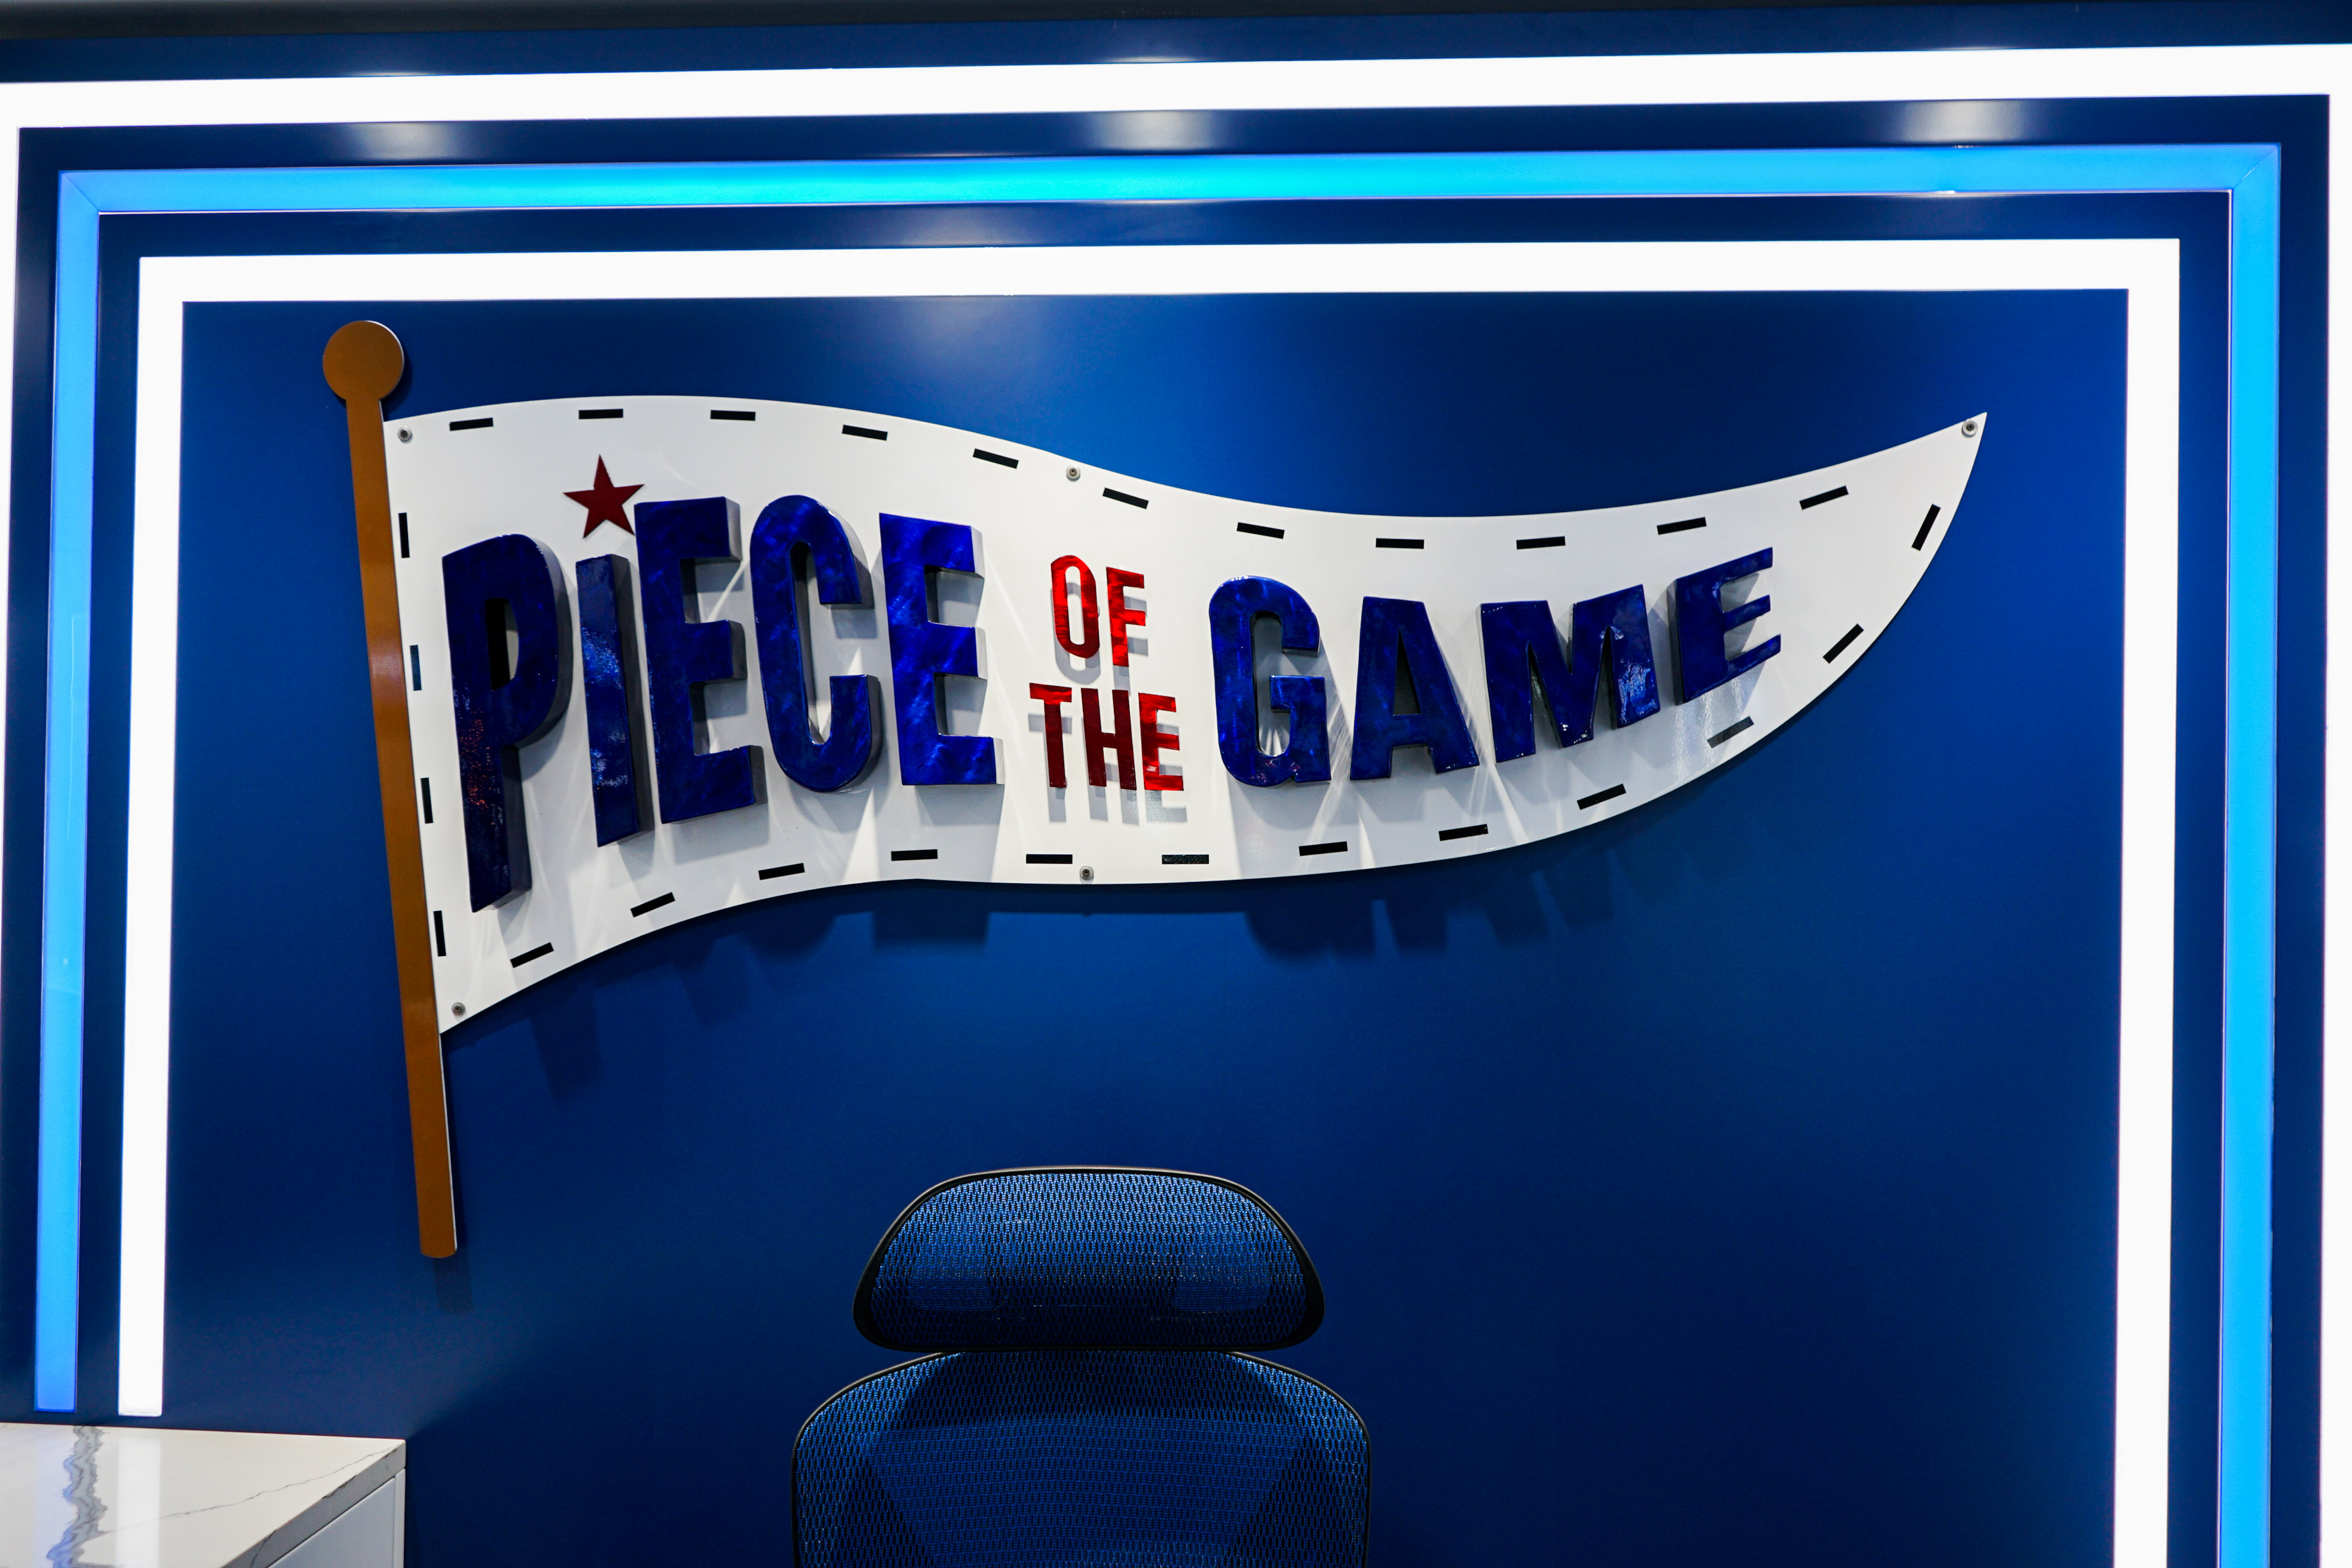 Piece of the Game Store